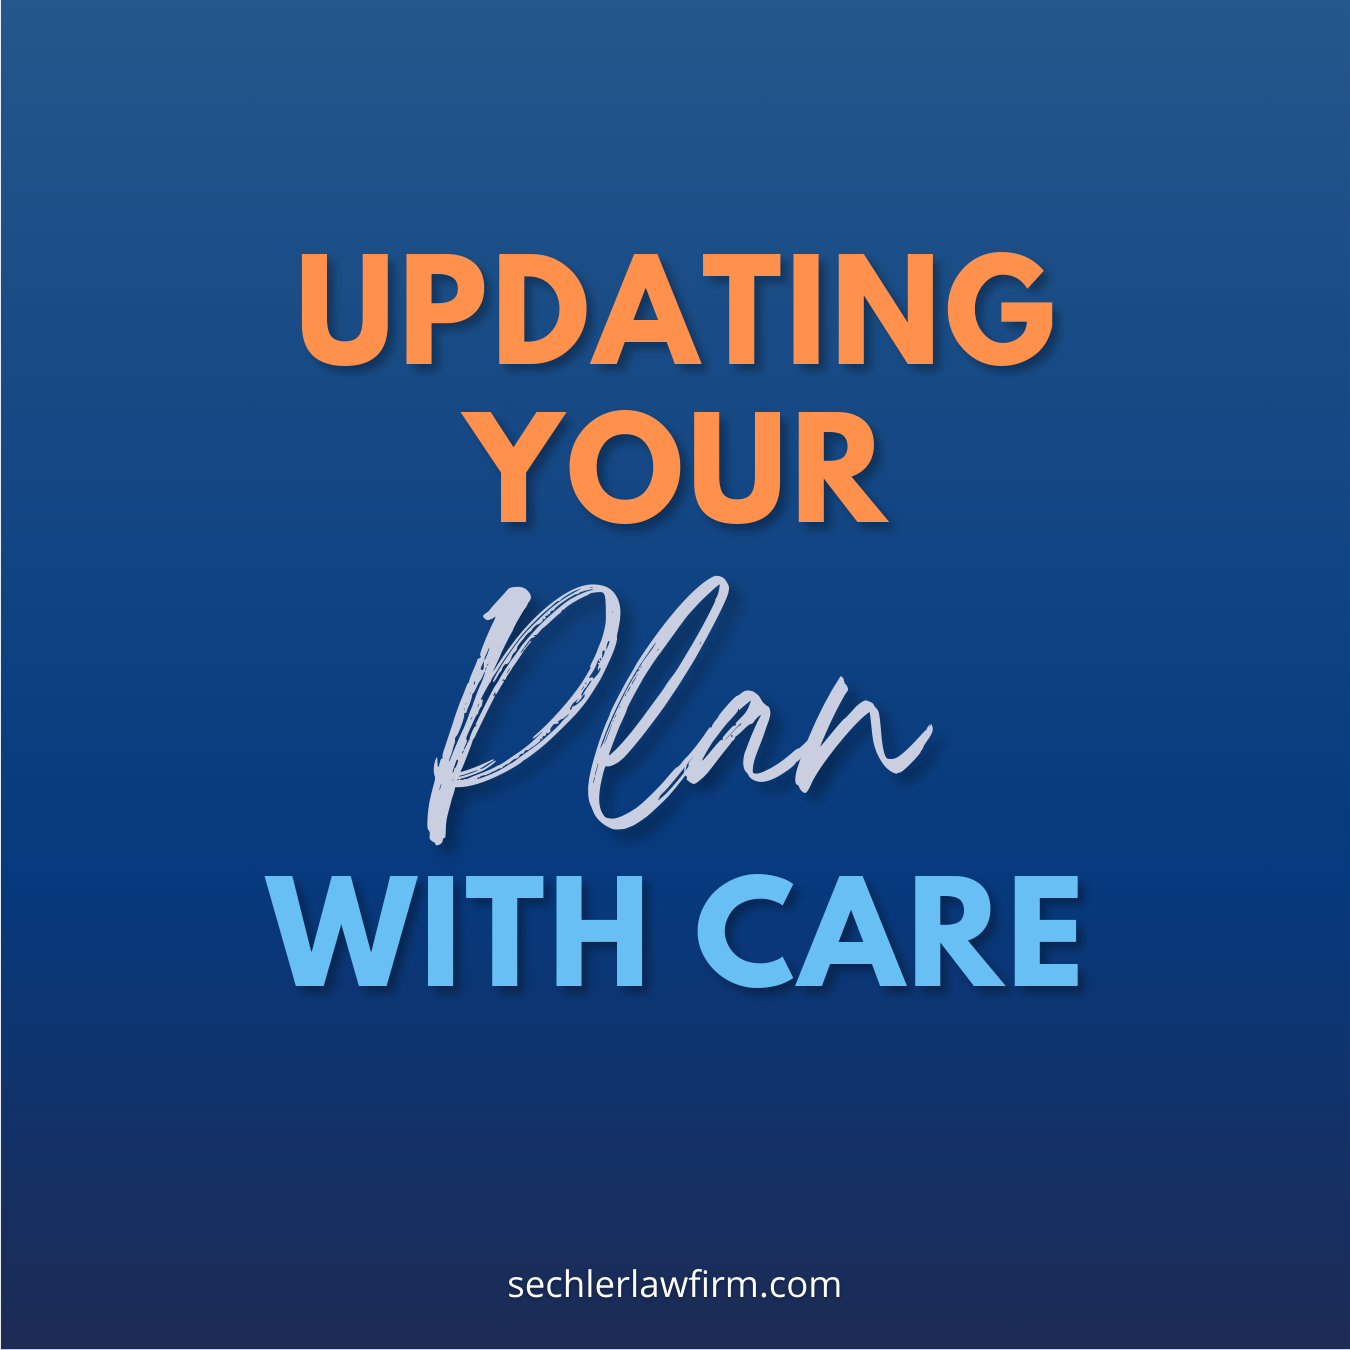 Updating Your Plan With Care